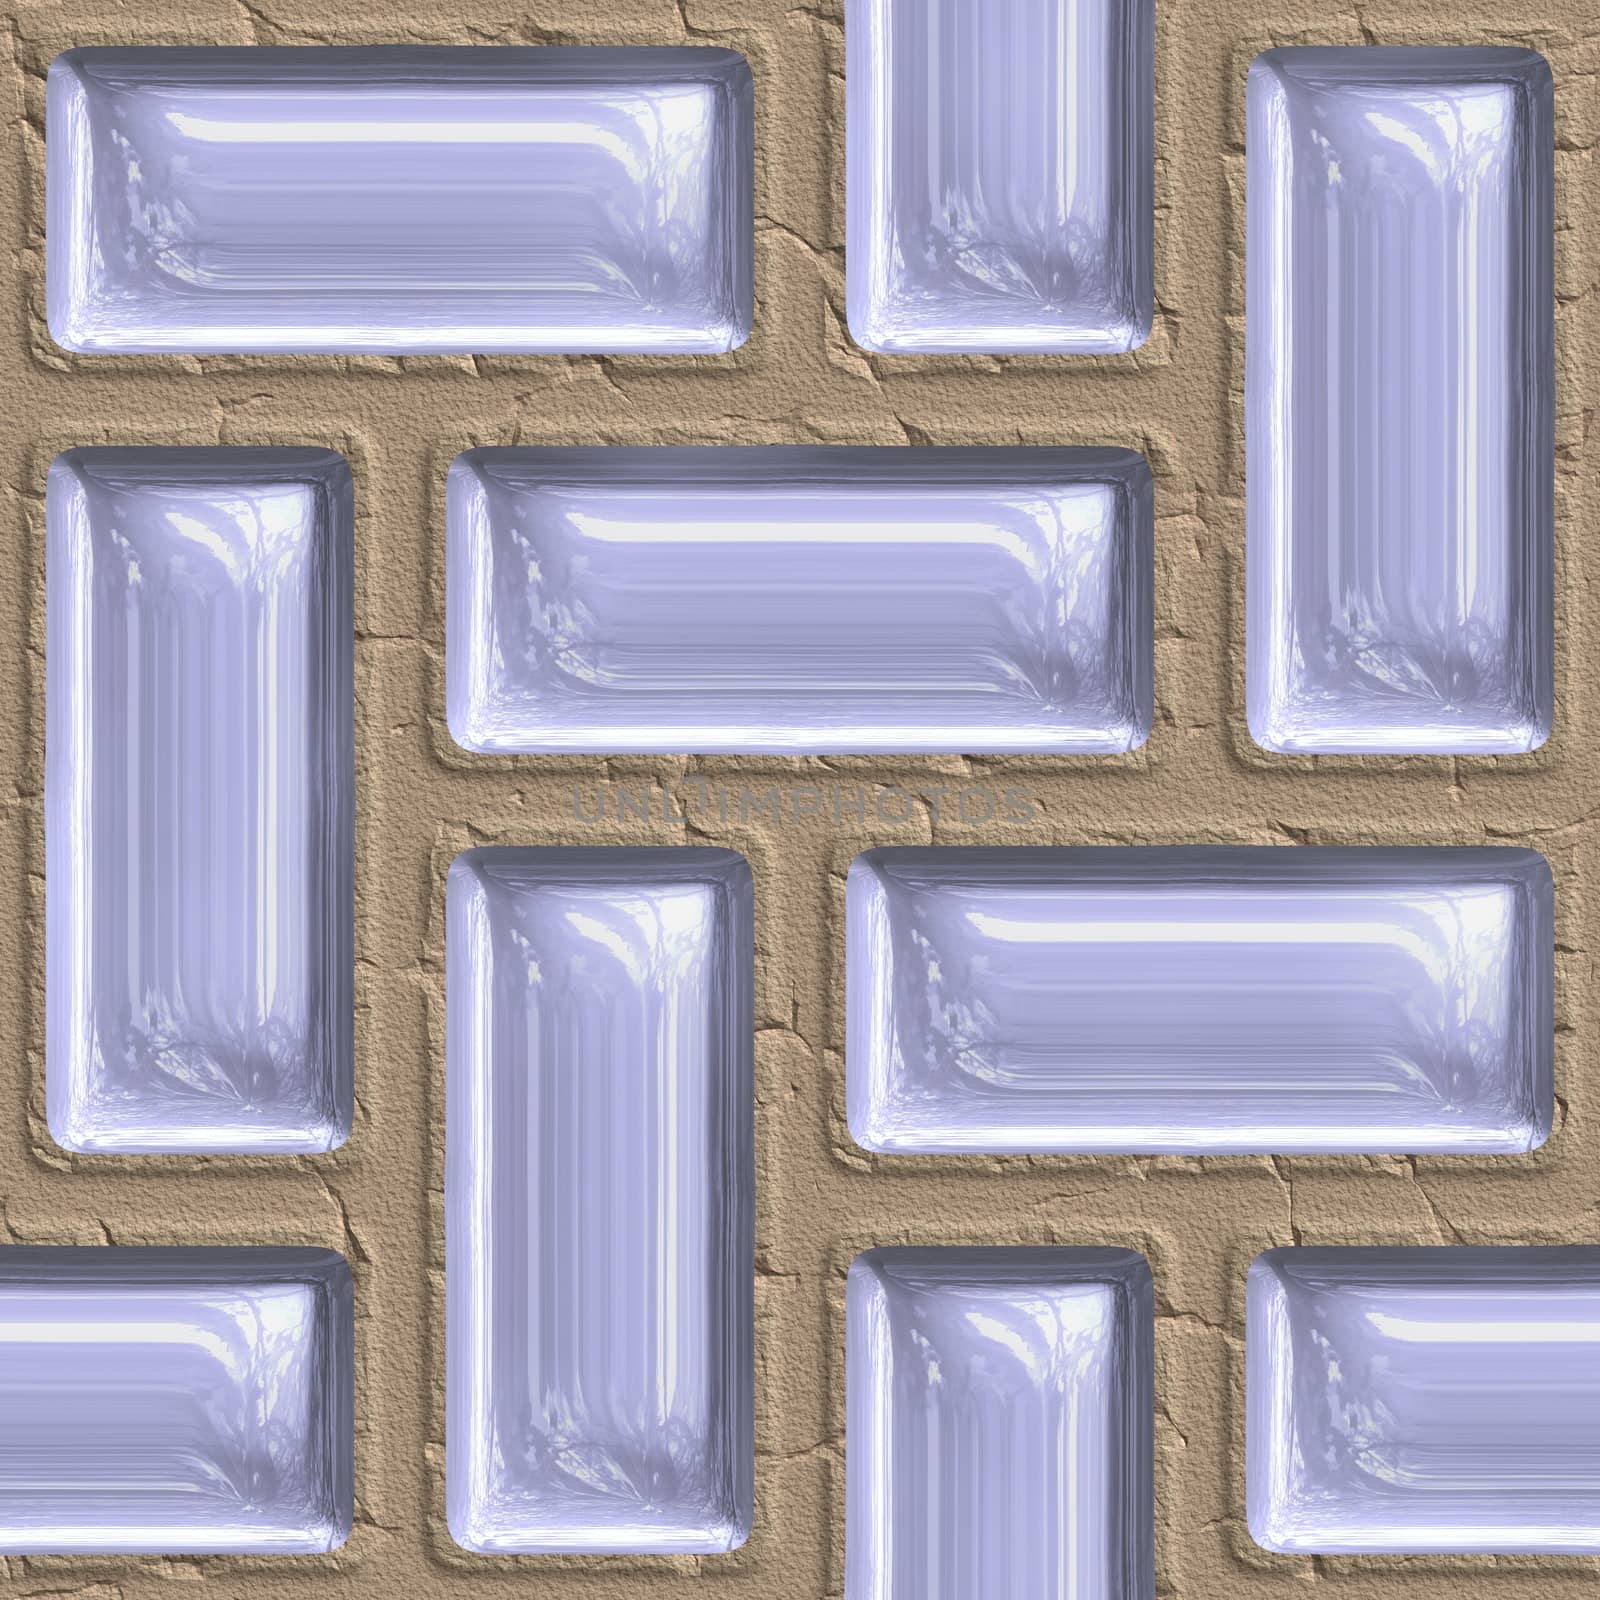 sandstone and liquid seamless tileable decorative background pattern